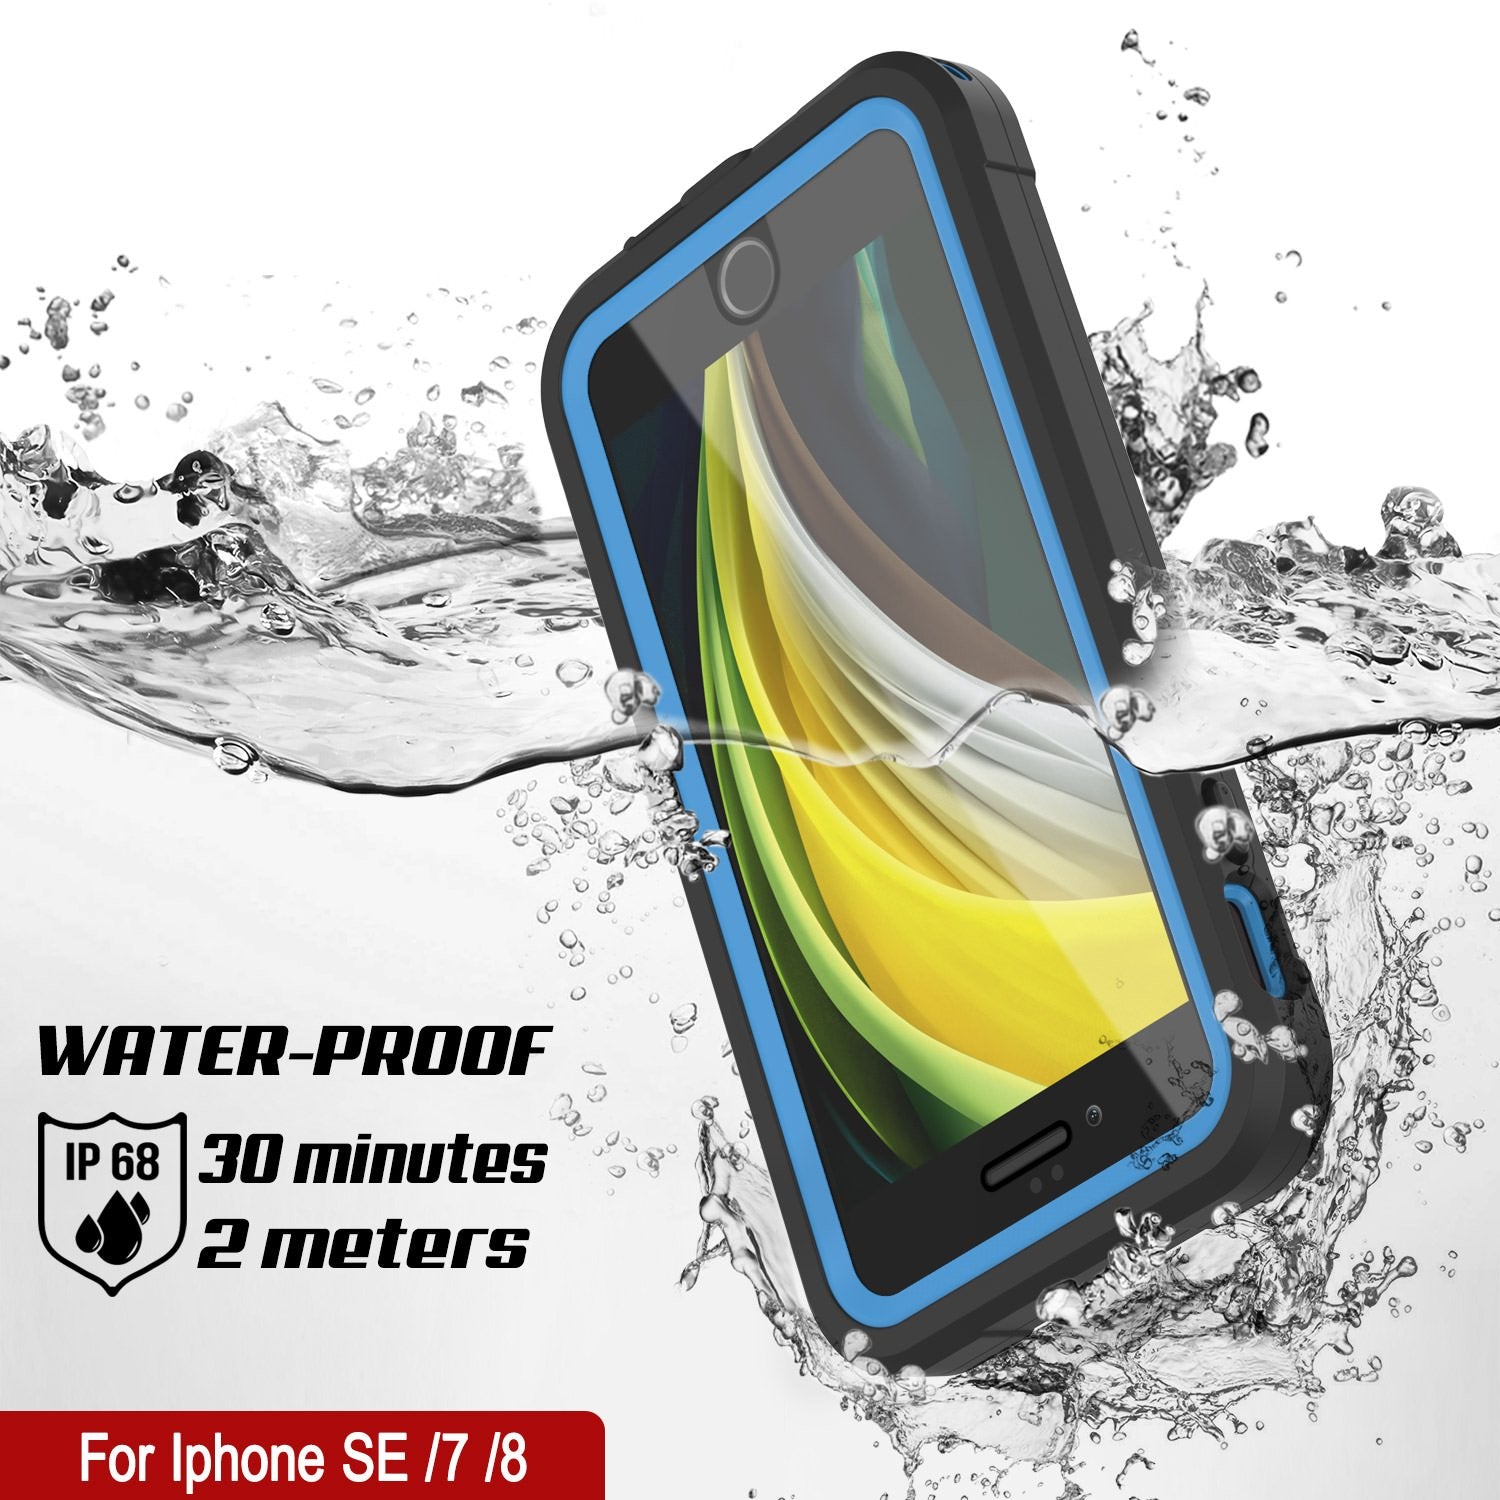 iPhone SE (4.7") Waterproof IP68 Case, Punkcase [Blue]  [Maximus Series] [Slim Fit] [IP68 Certified] [Shockresistant] Clear Armor Cover with Screen Protector | Ultimate Protection